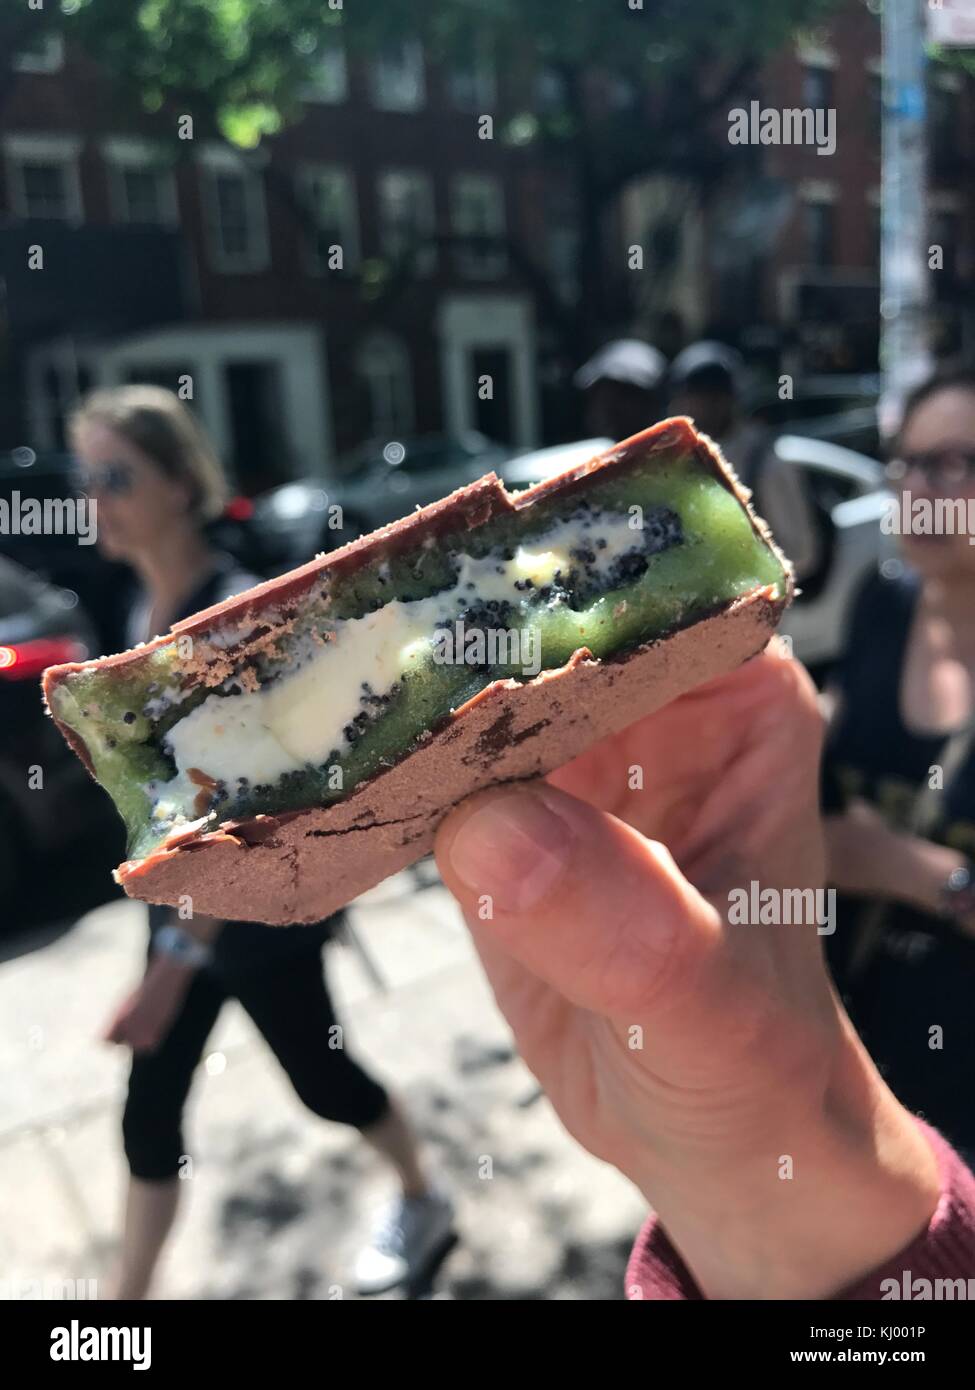 New York, USA. 03rd June, 2017. A person presents a kiwi ice cream sandwich with a vanilla ice cream core surrounded by kiwi sorbet and coated with chocolate in New York, US, 03 June 2017. · NO WIRE SERVICE · Credit: Christina Horsten/dpa/Alamy Live News Stock Photo